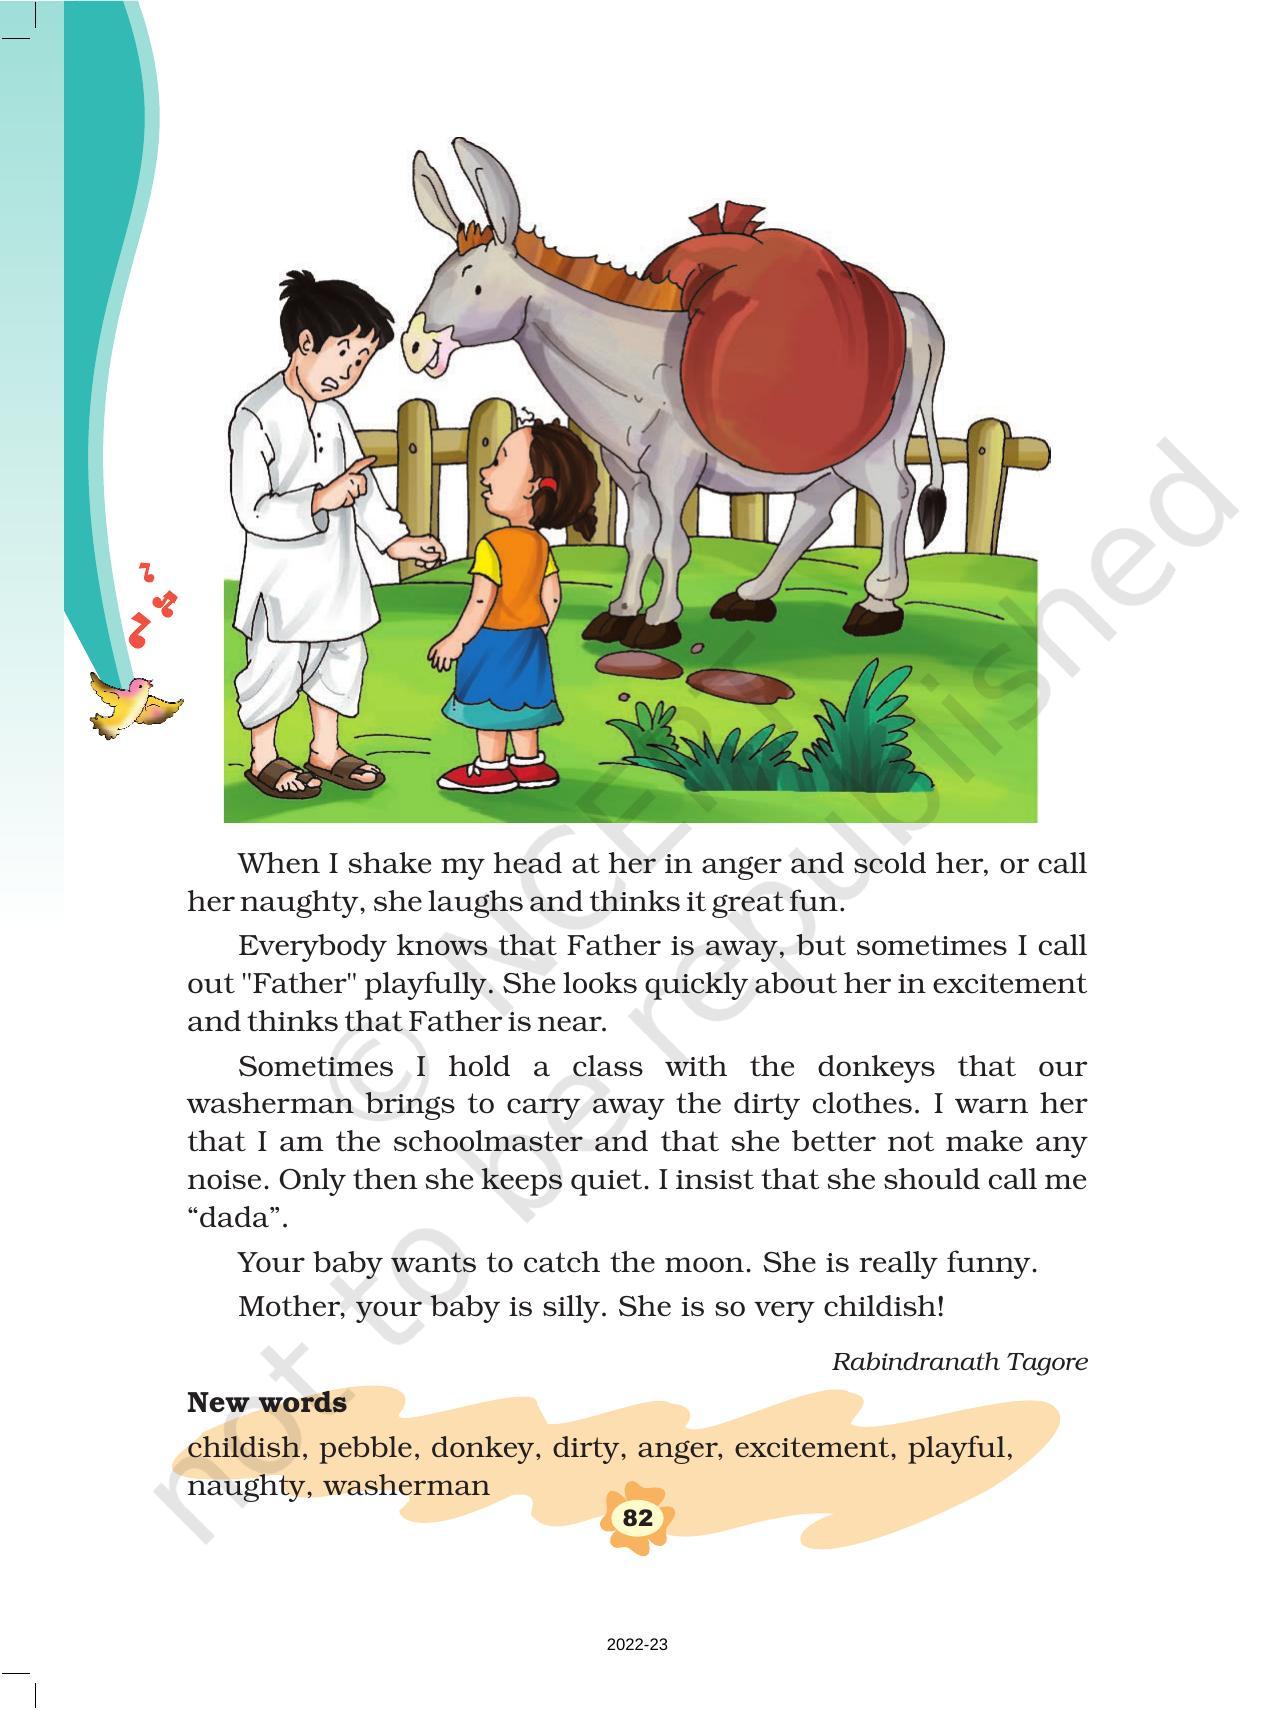 NCERT Book for Class 3 English: Unit VIII.1-What’s in the Mailbox? - Page 6